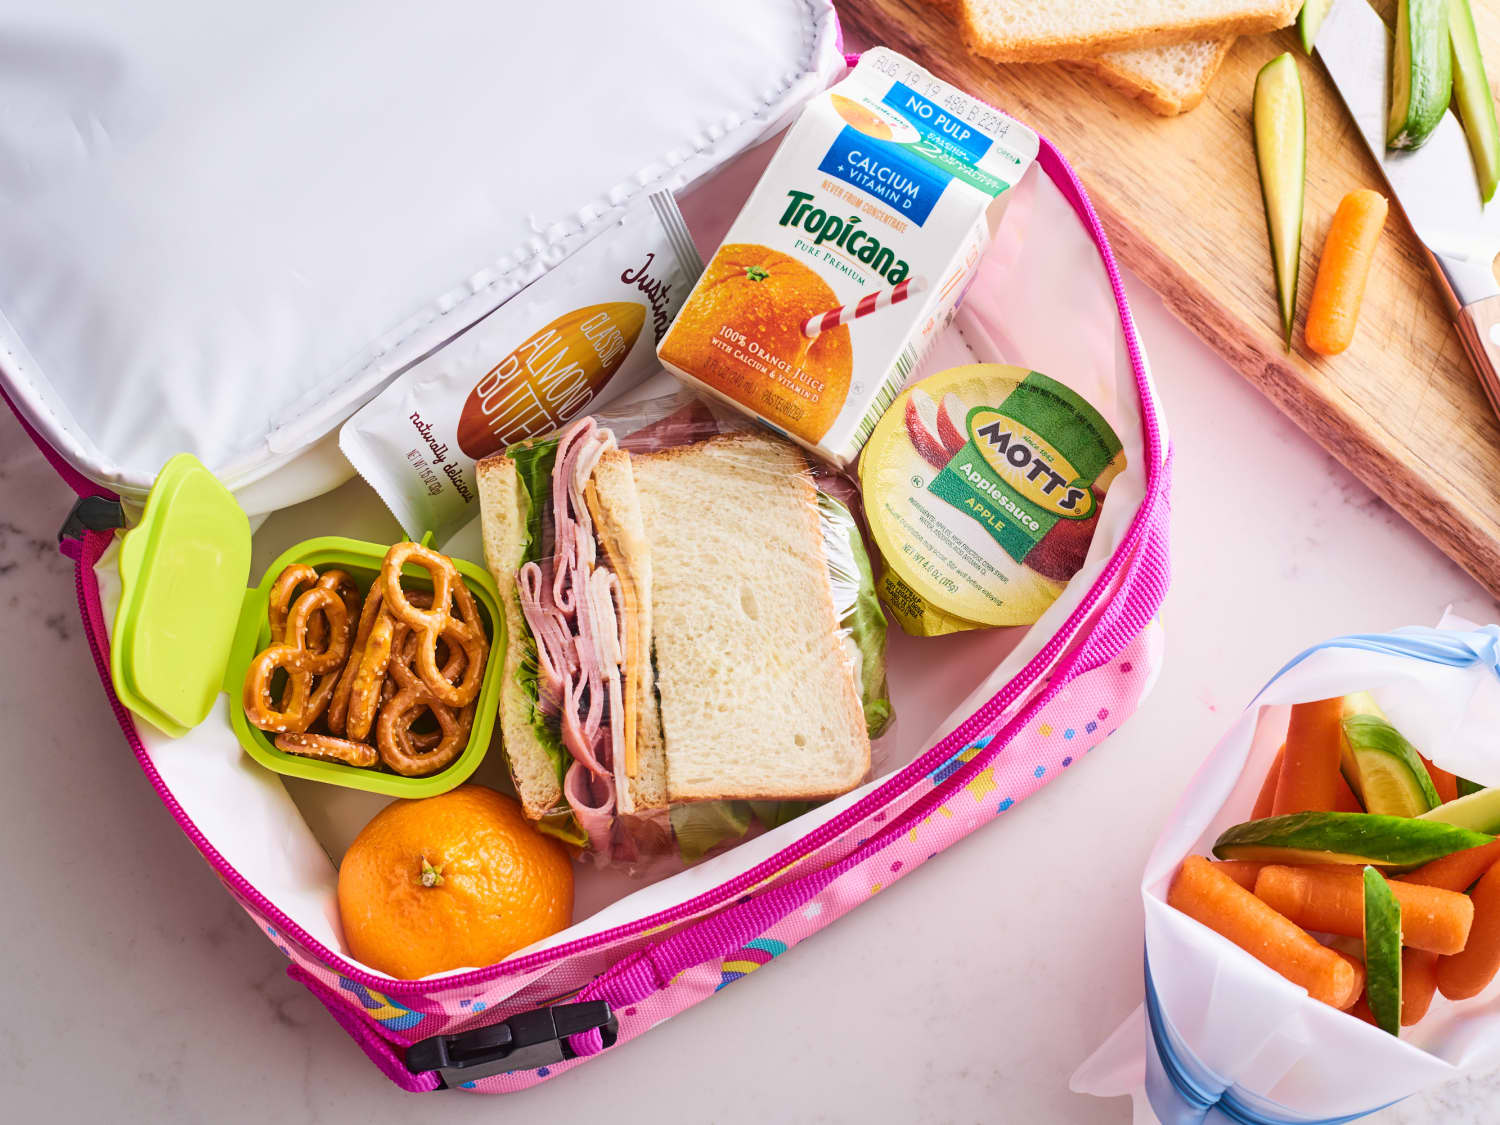 Home - My Hot Lunchbox